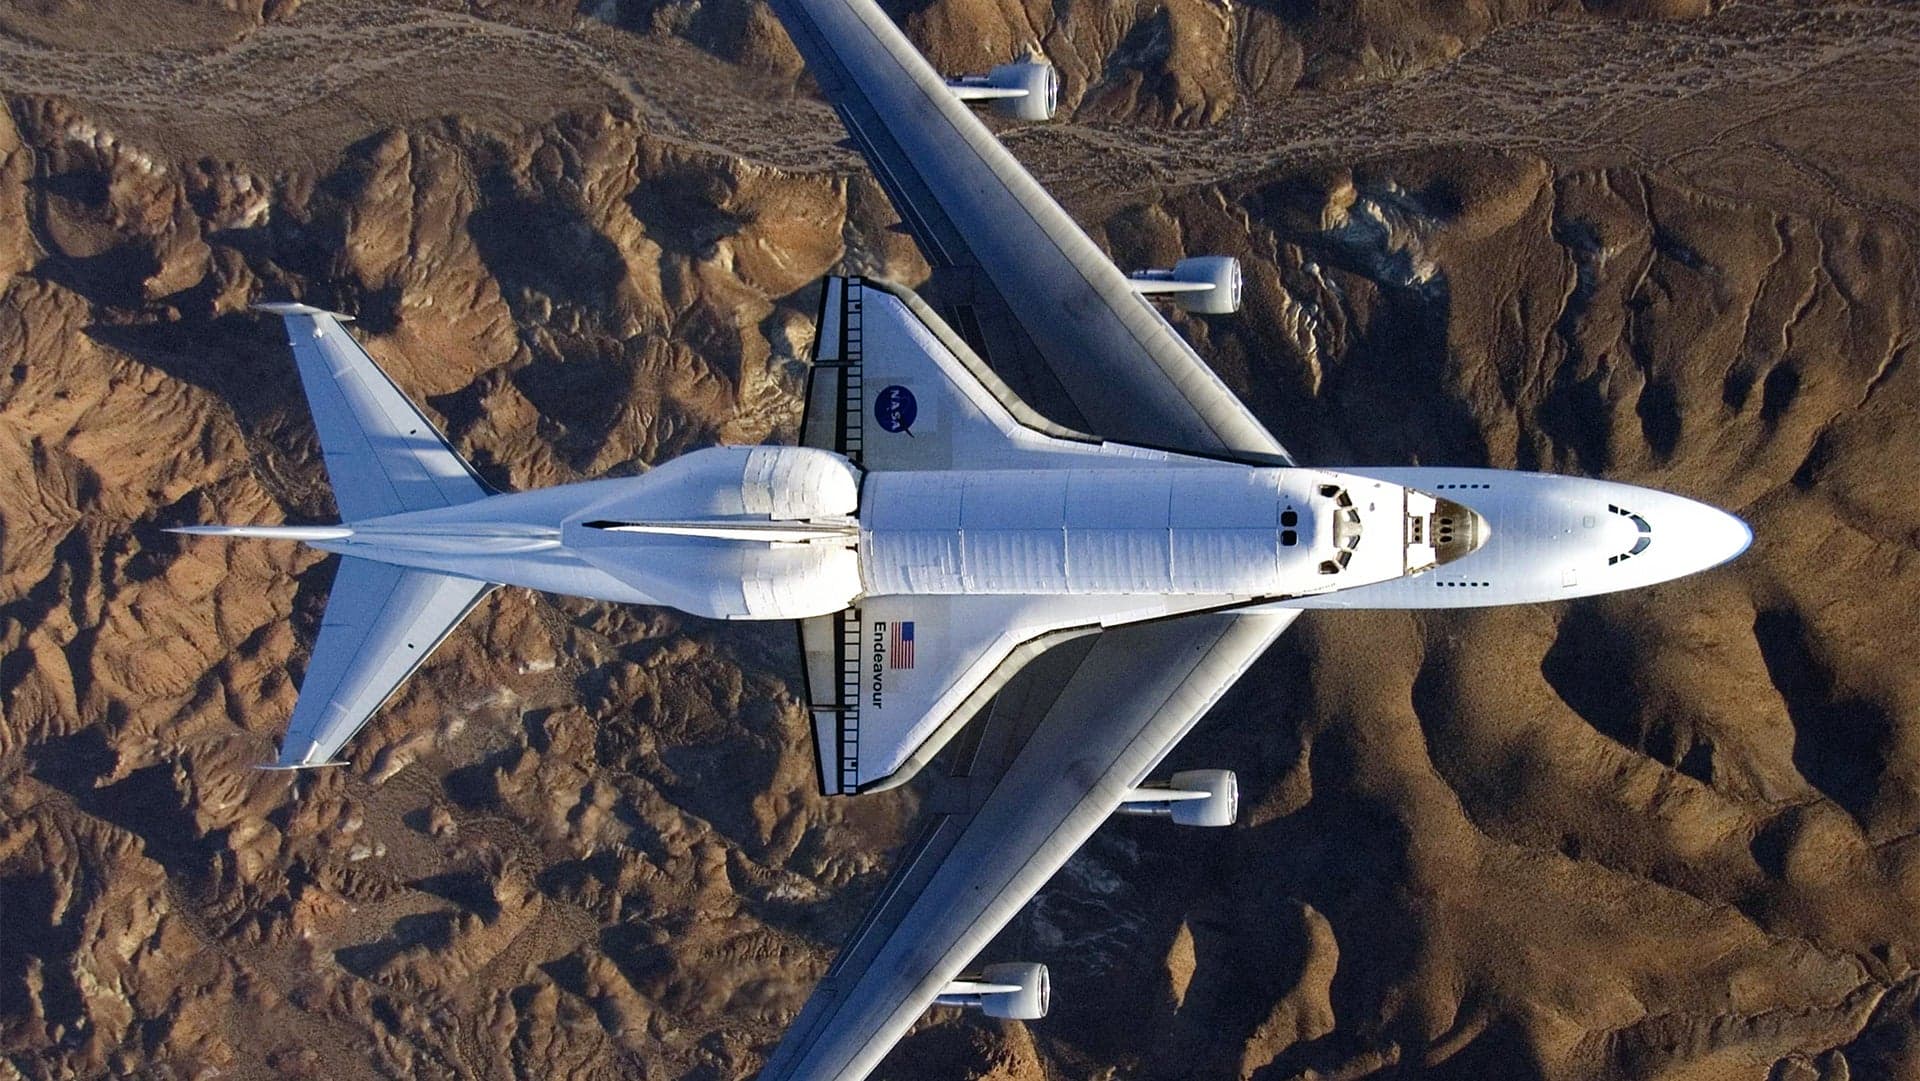 Behold Arguably The Most Spectacular Photo Of NASA’s Shuttle Carrier Aircraft Ever